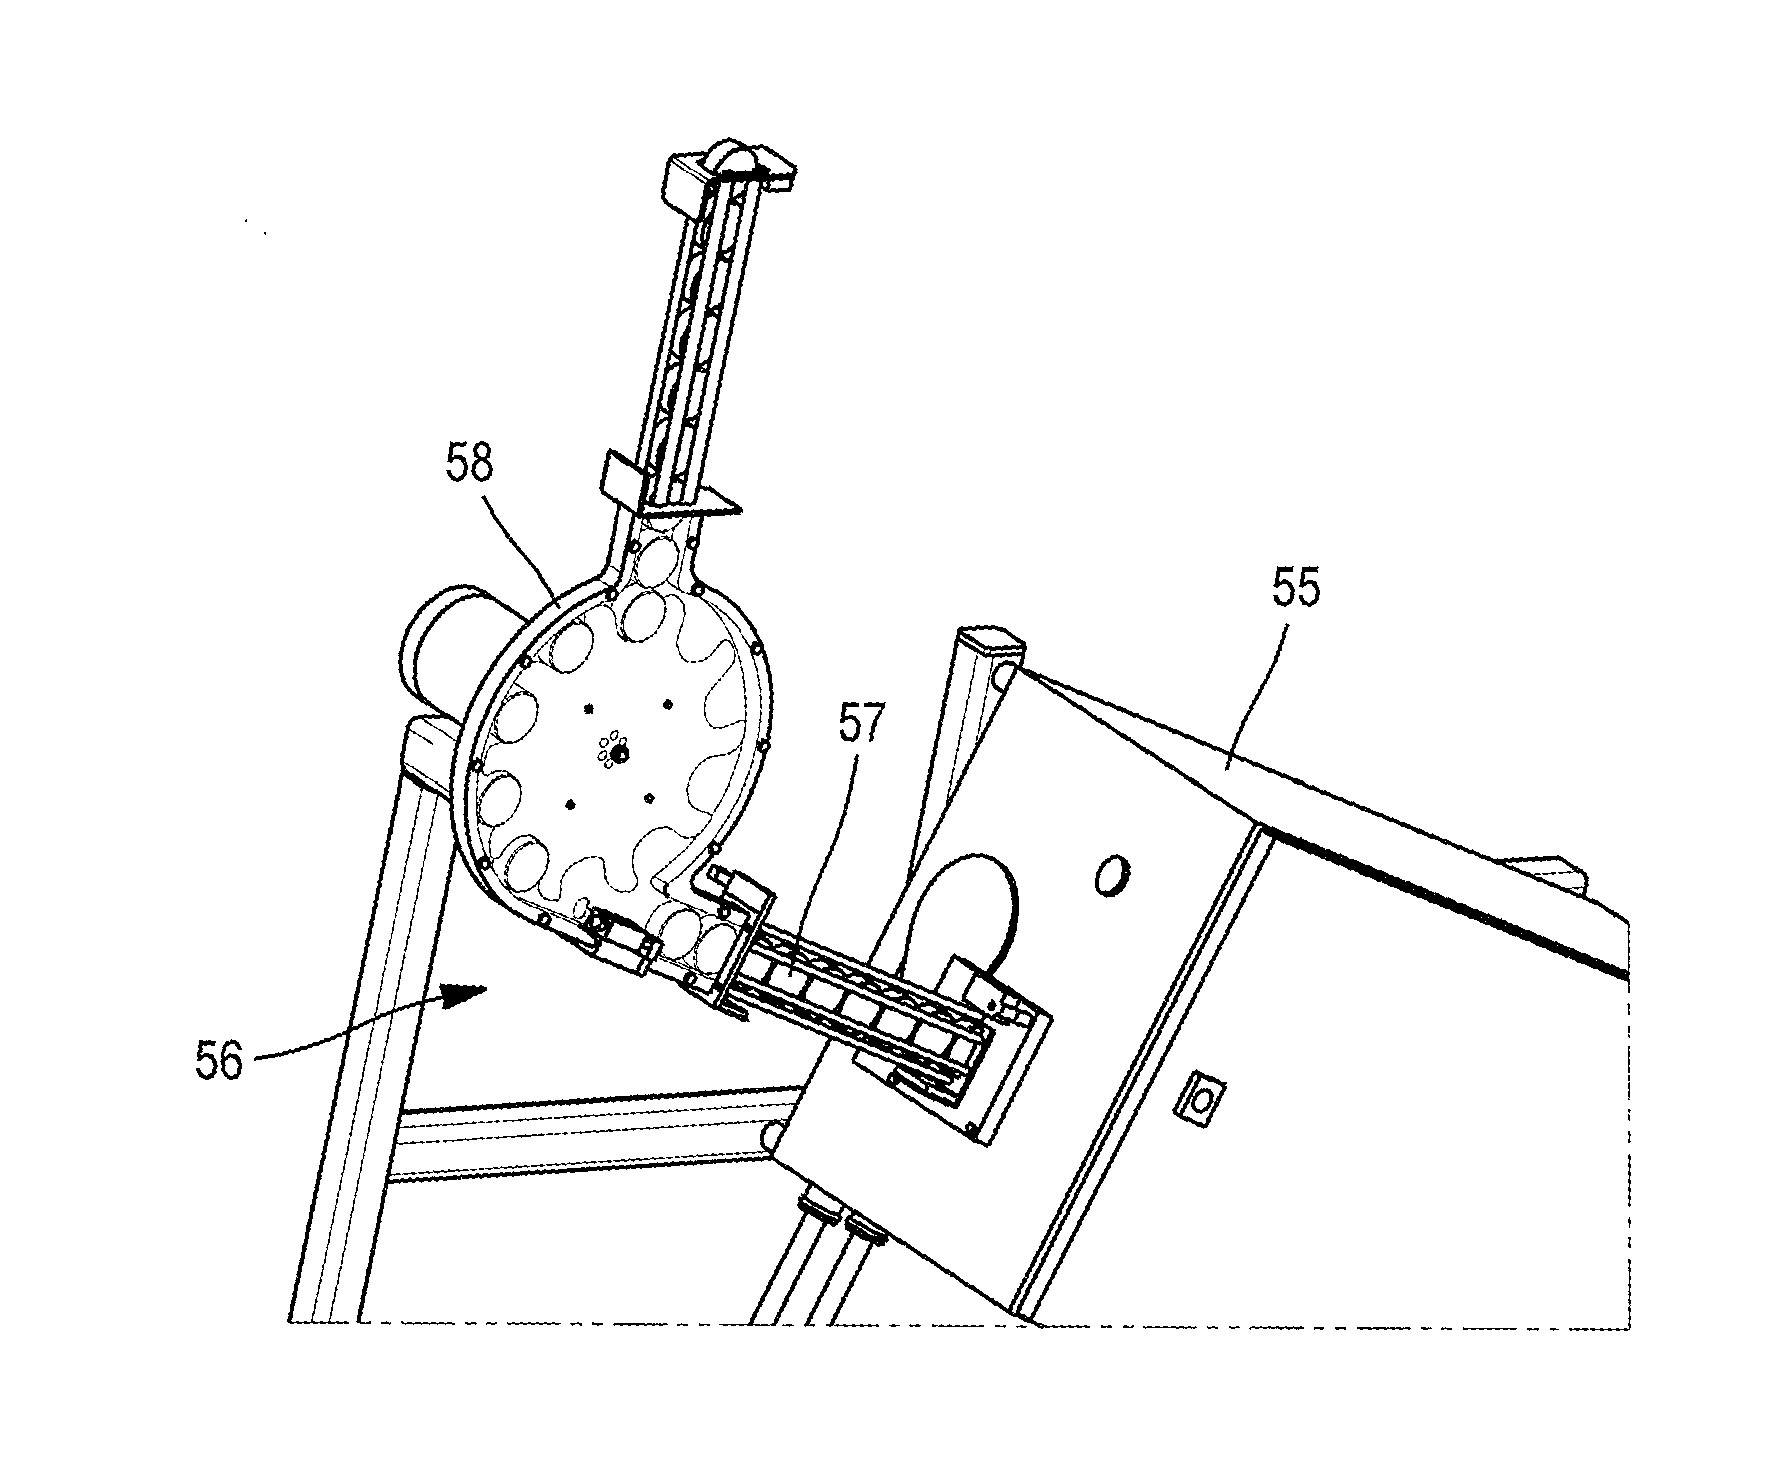 Device and method for the decontamination of hollow objects such as container caps using UV radiations